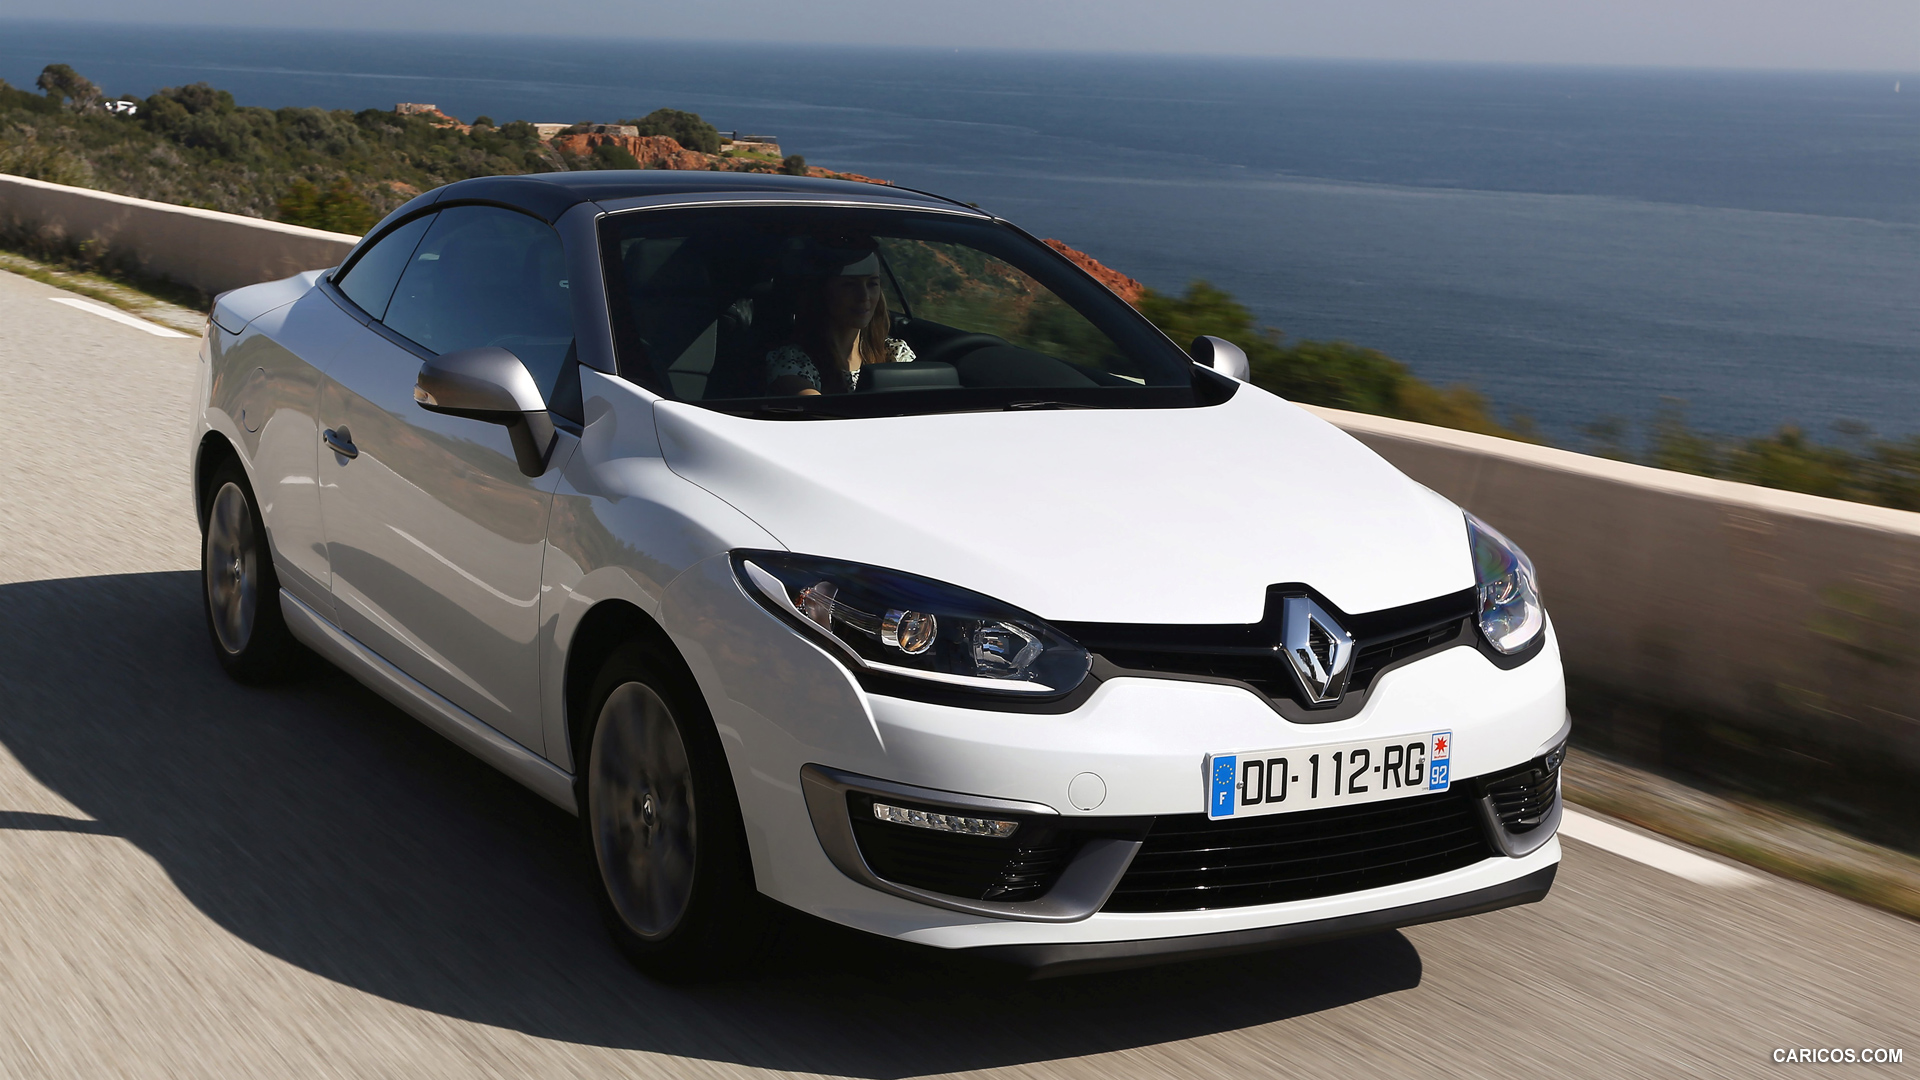 2015 Renault Megane Coupe-cabriolet Pics, Vehicles Collection